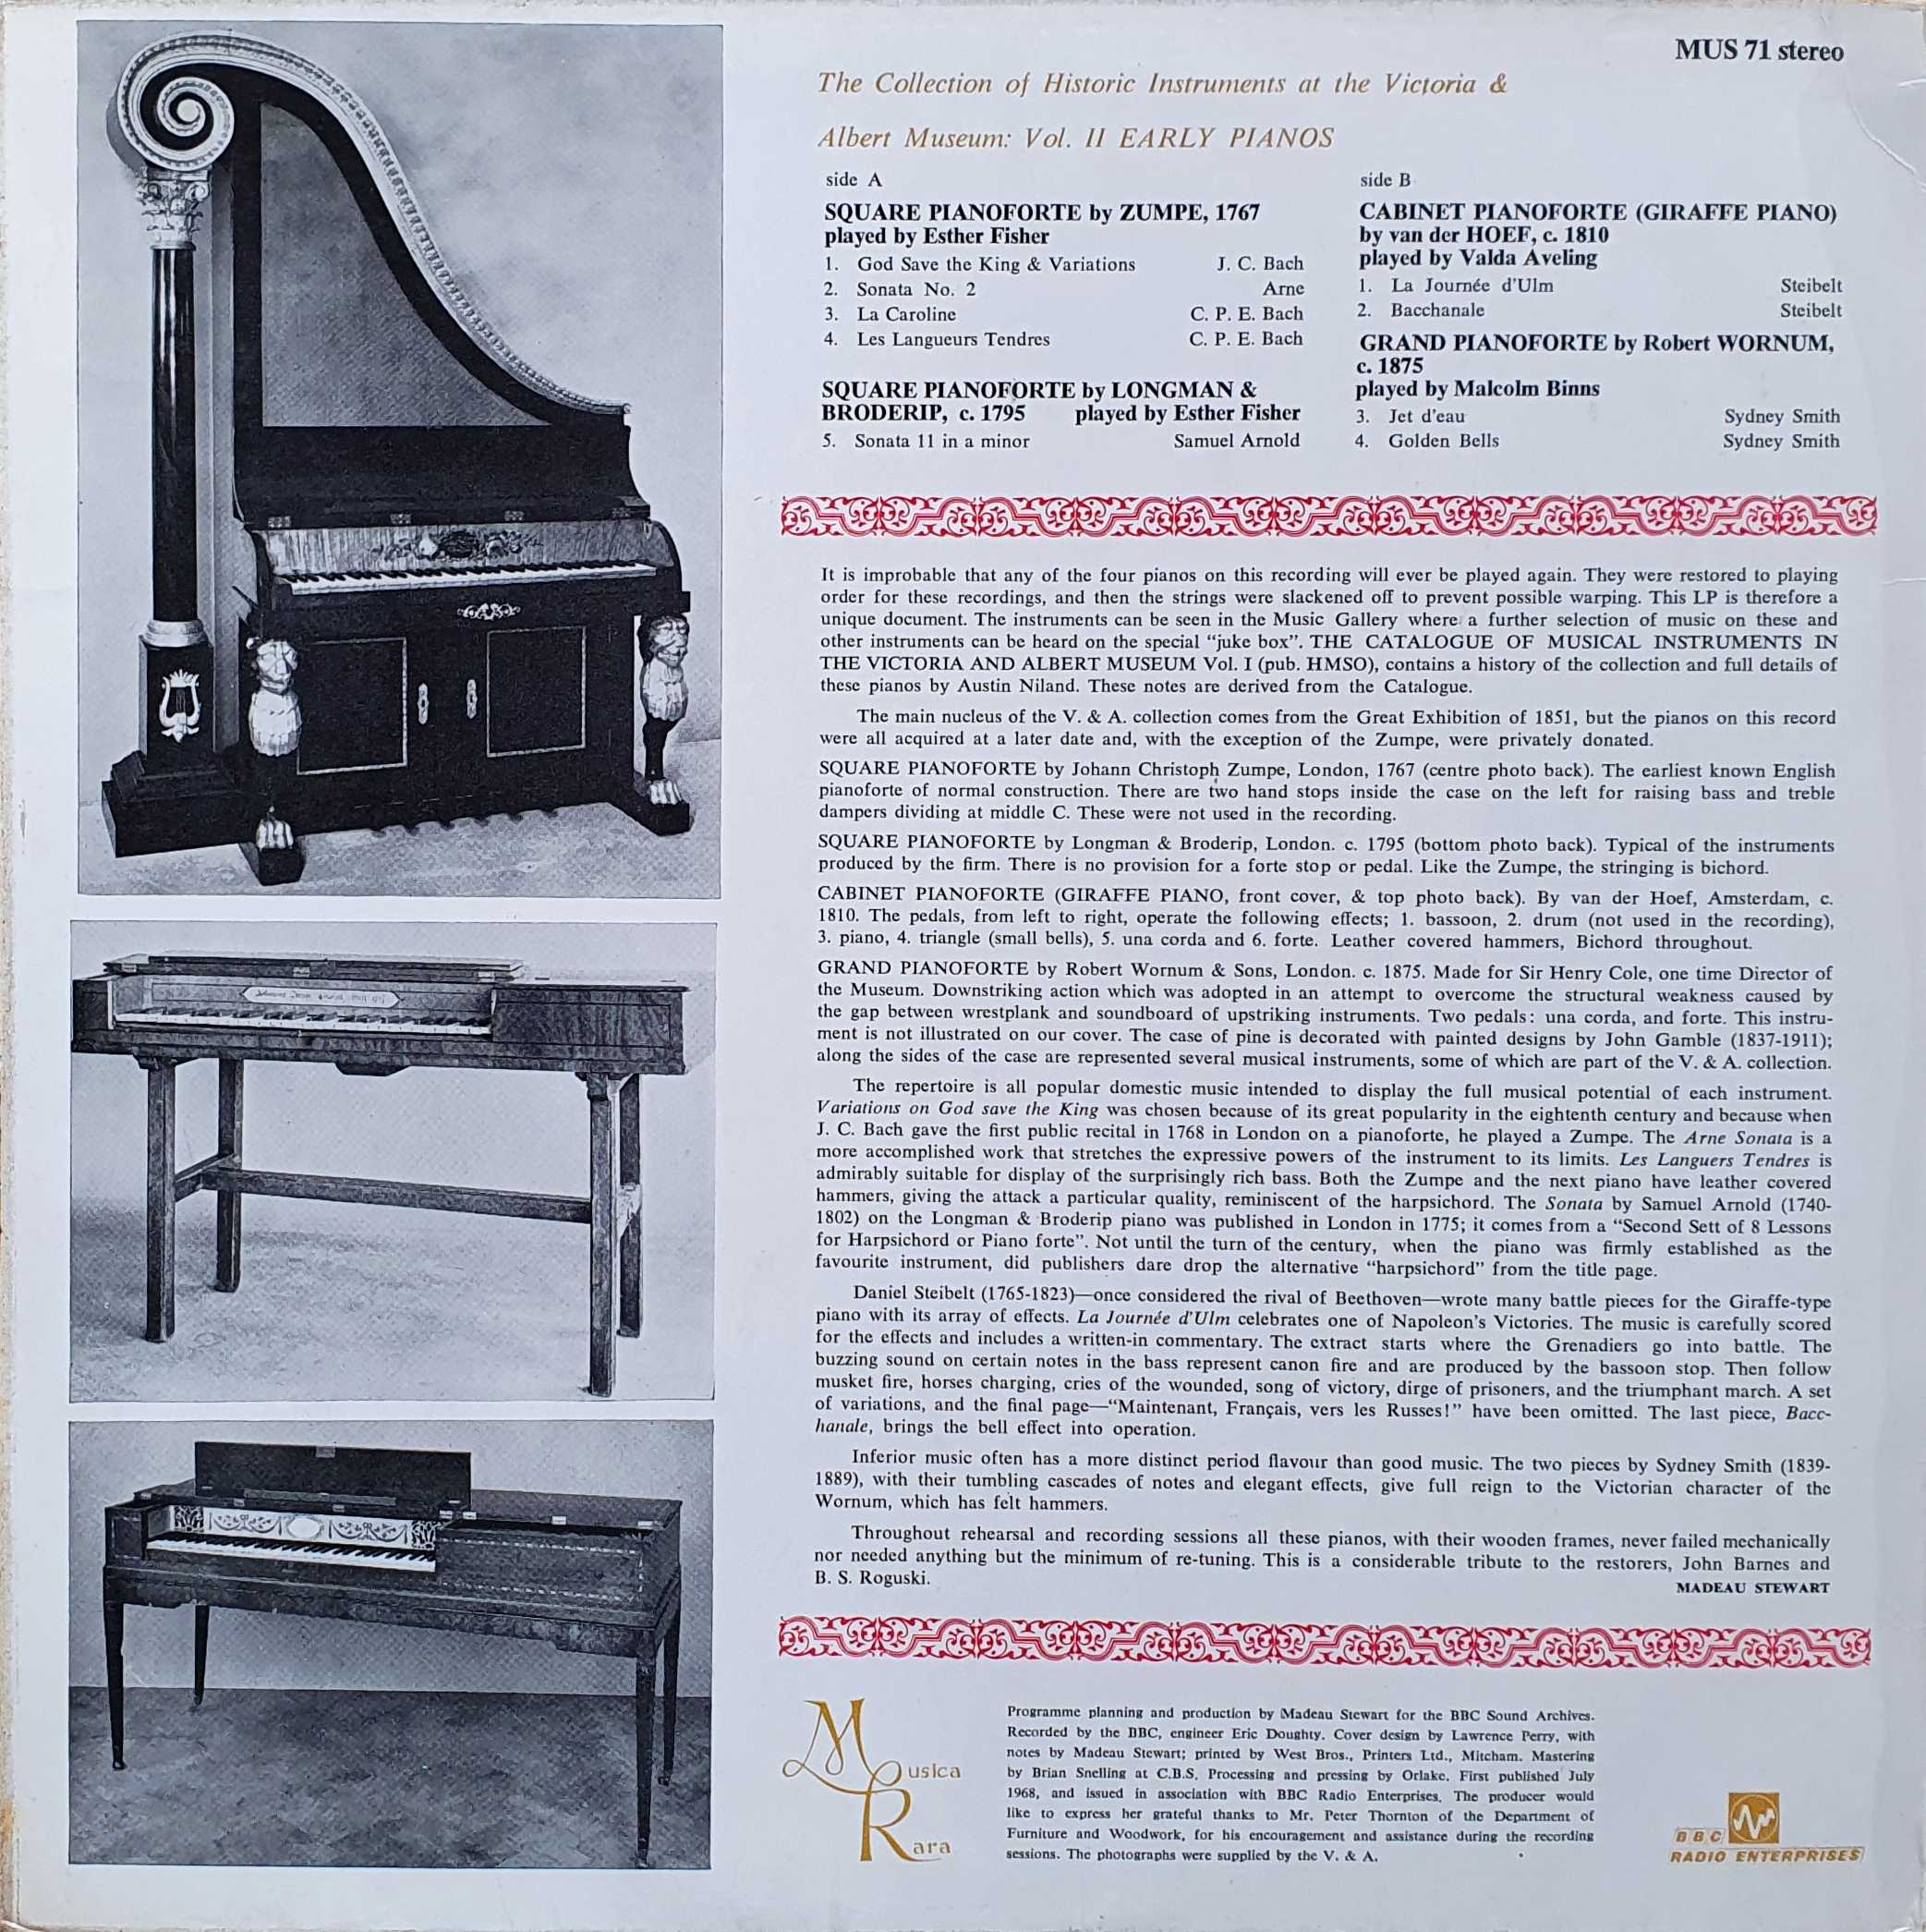 Picture of MUS 71 The V & A keyboard collection - Volume II by artist Various from the BBC records and Tapes library